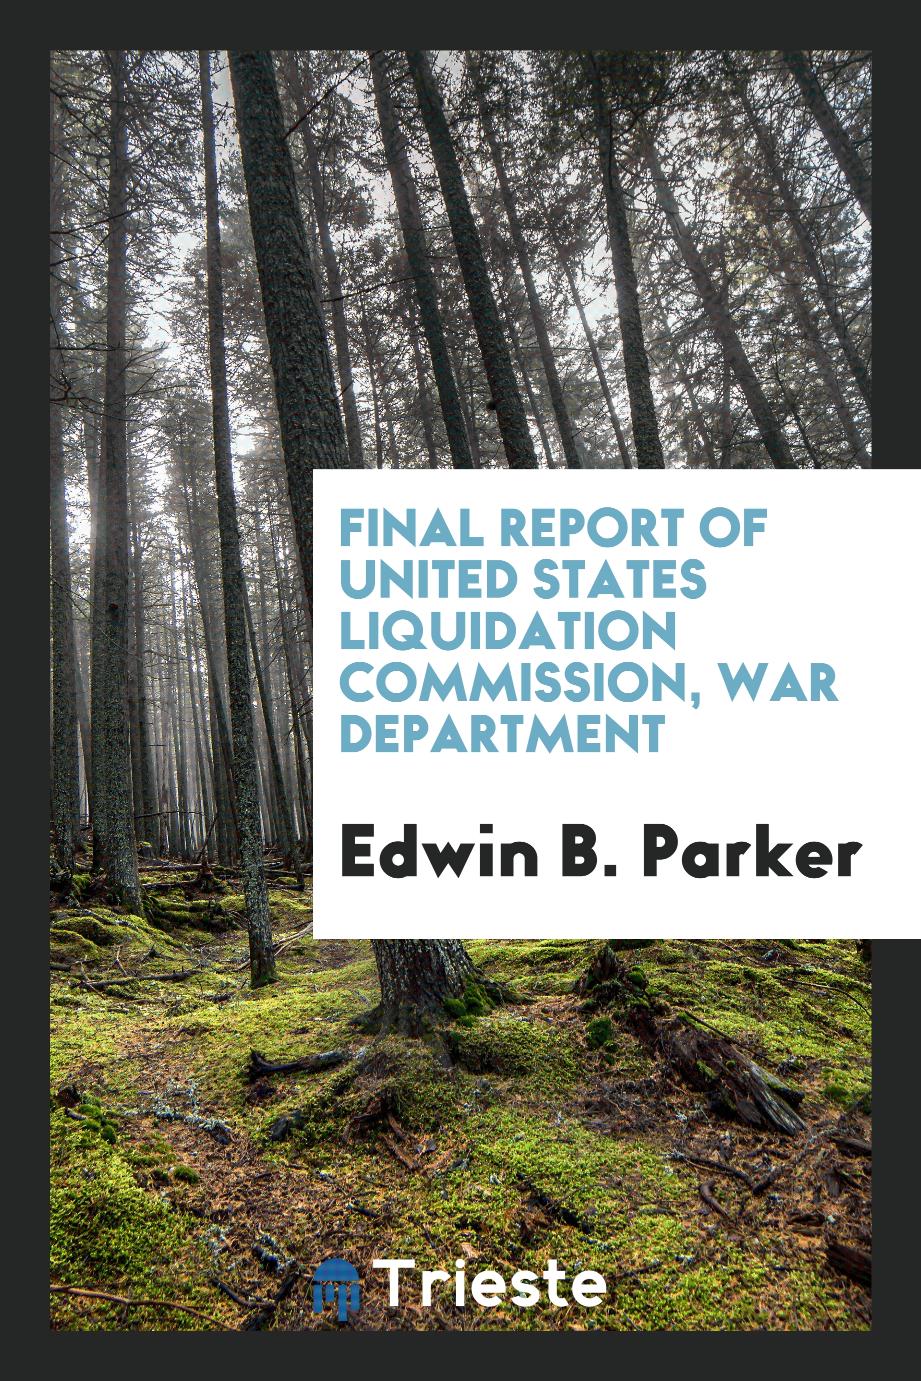 Final Report of United States Liquidation Commission, War Department